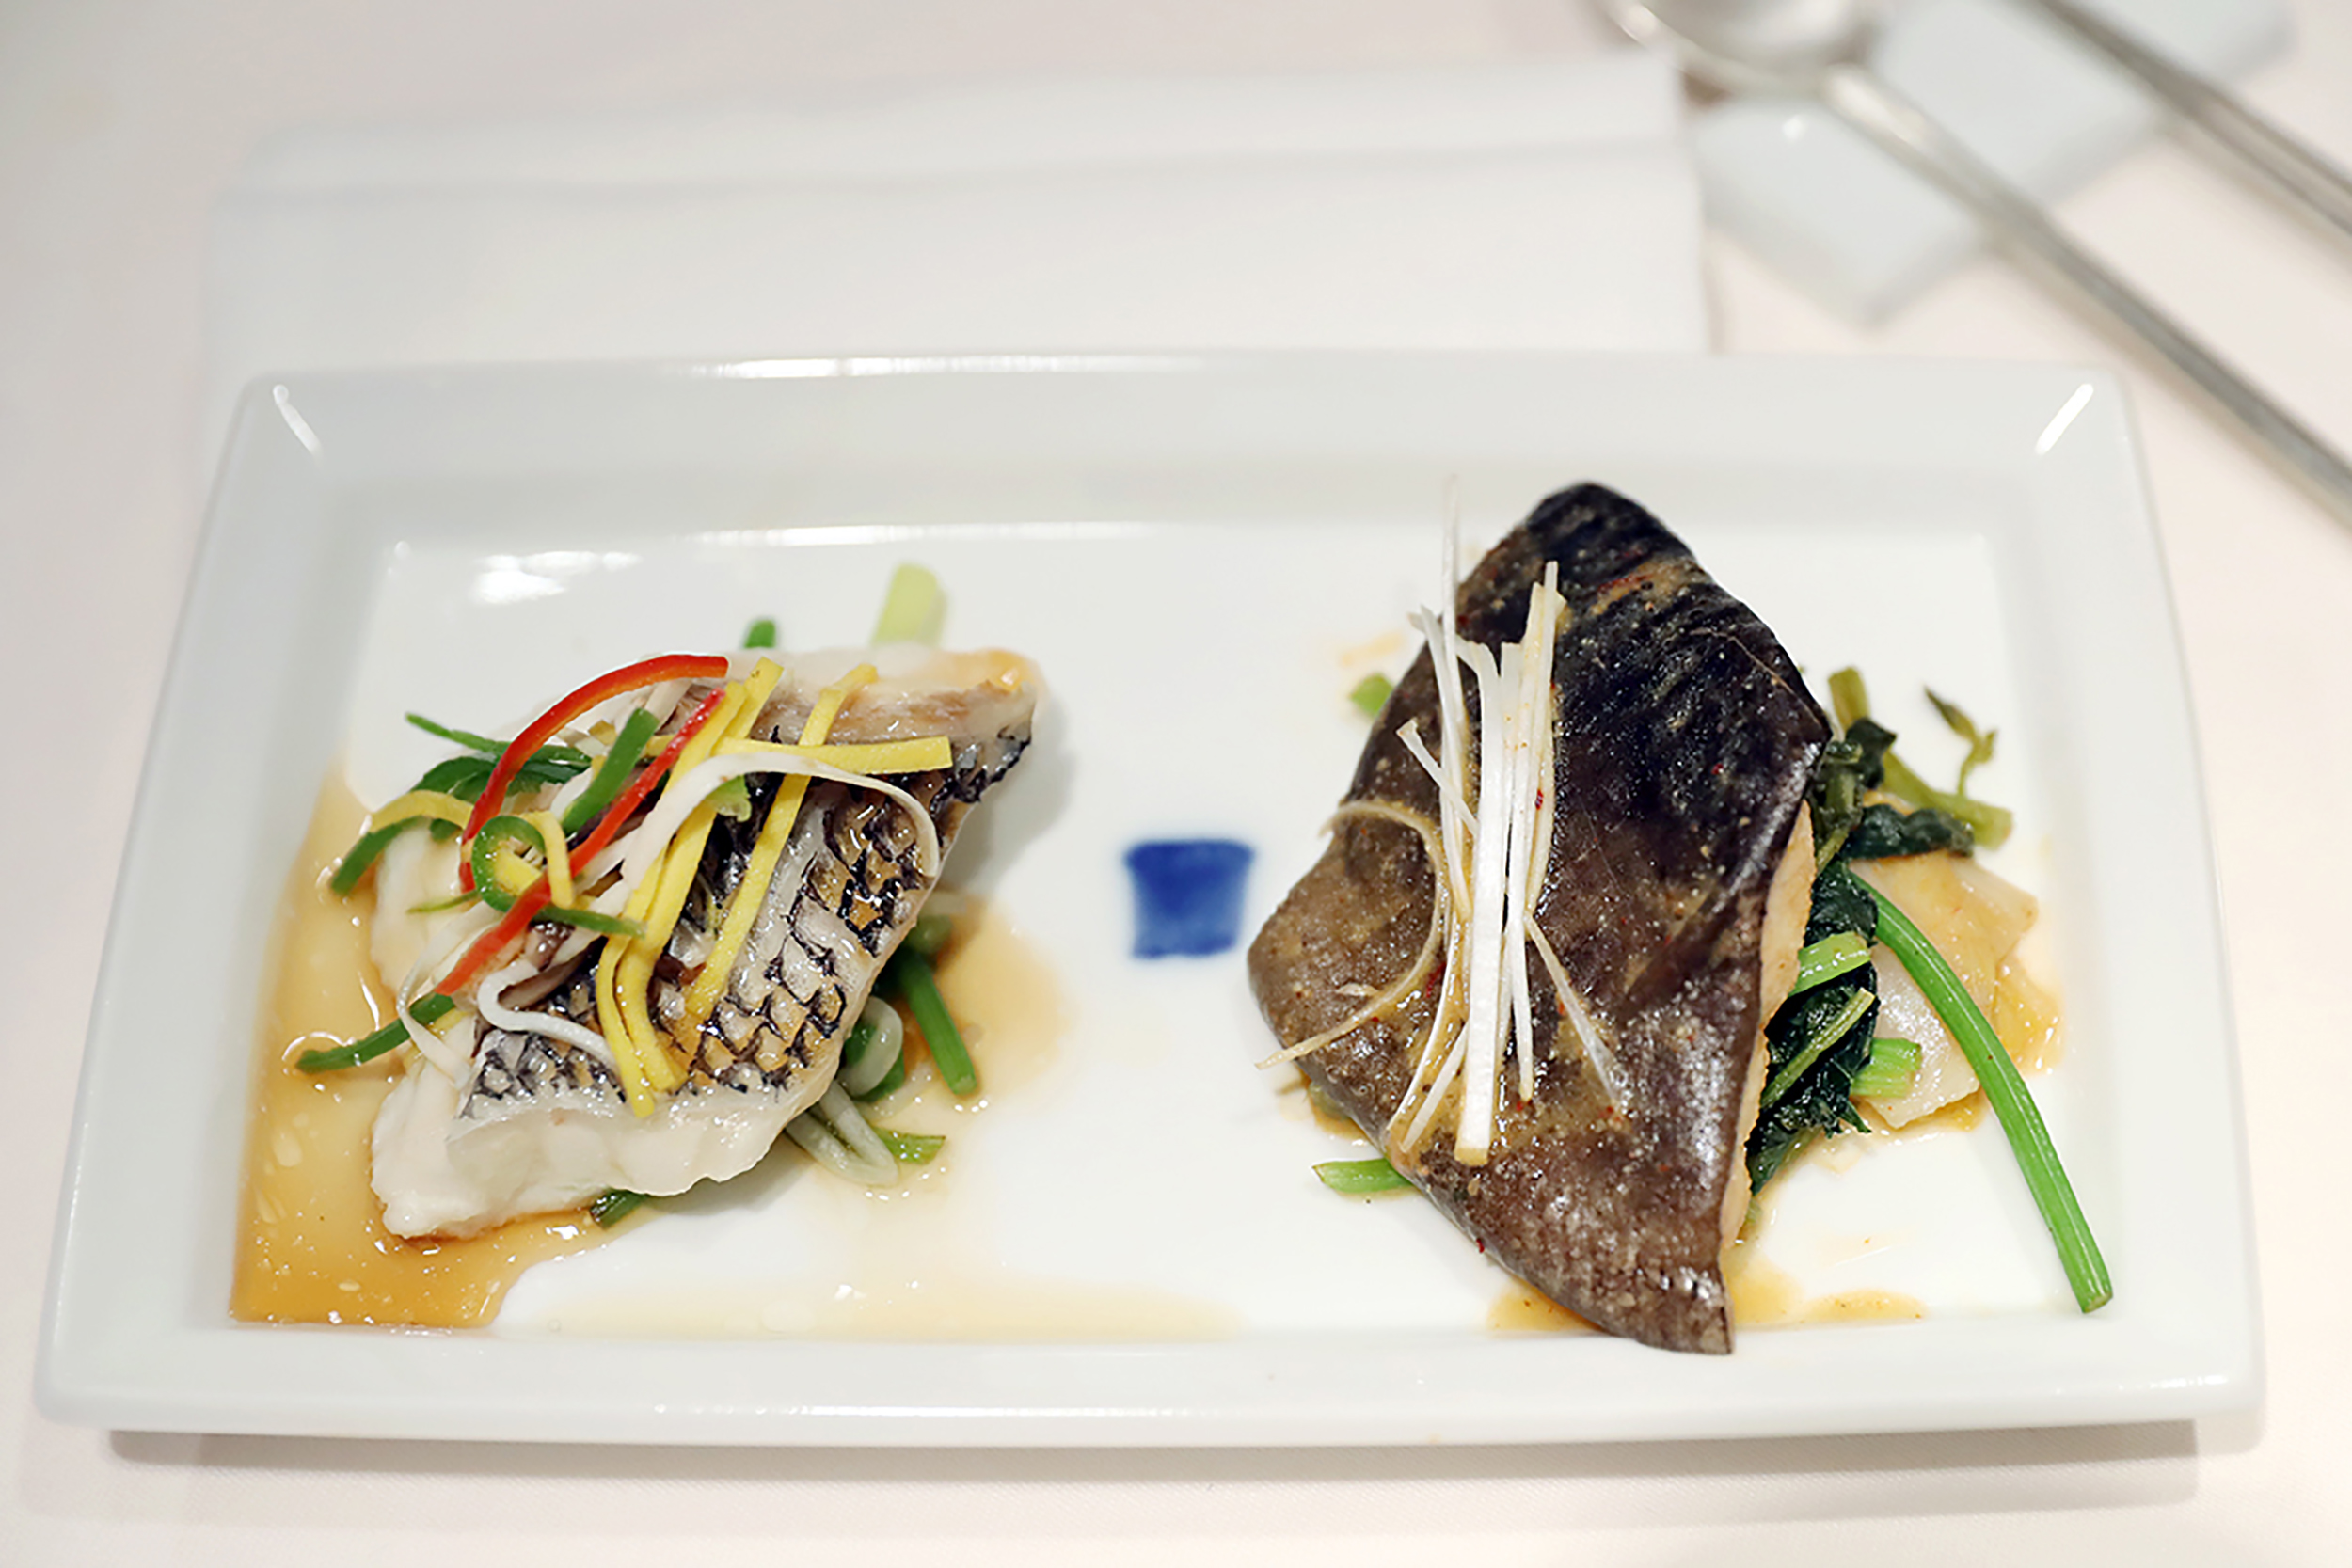 PHOTO: A snapper steak and a catfish steak, which will be served at the dinner of the upcoming inter-Korean summit.